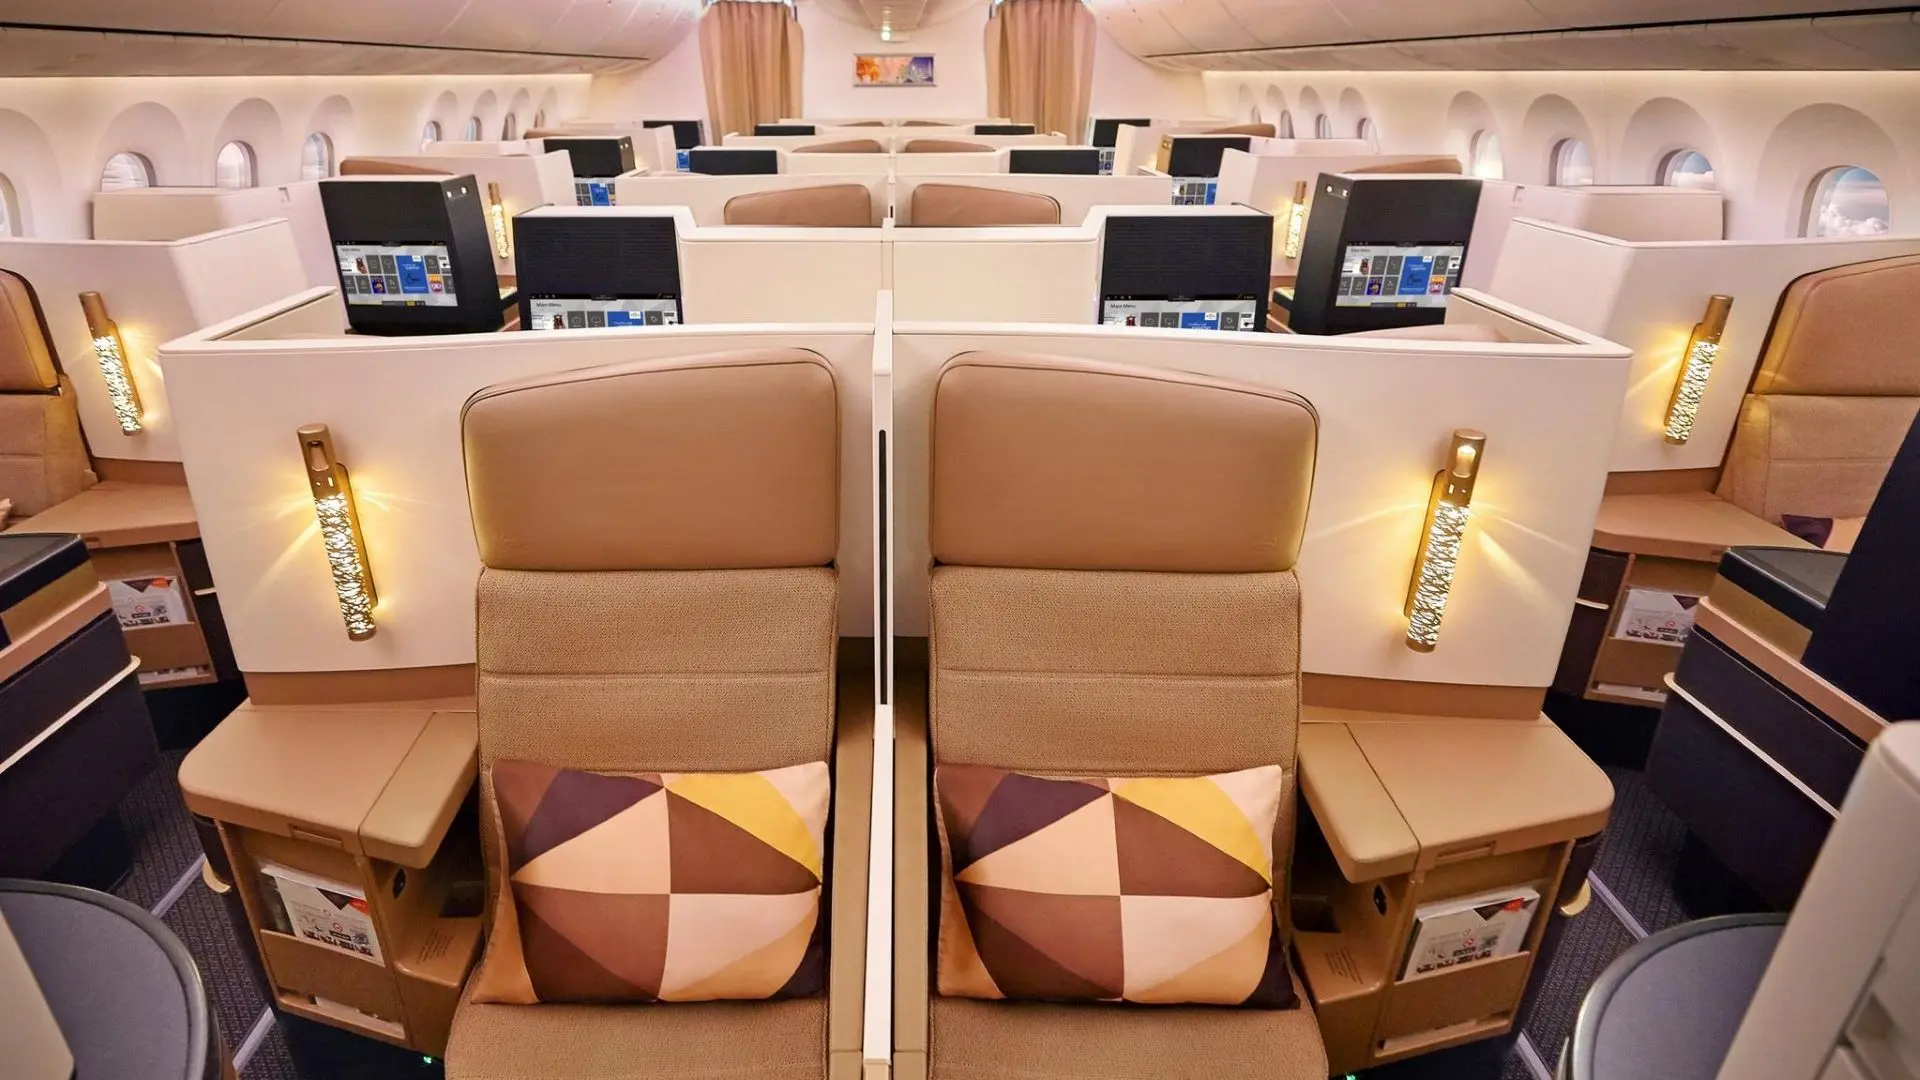 Airlines Offers - Etihad - CYBER MONDAY OFFERS - 20% discount on tickets**EXPIRED**